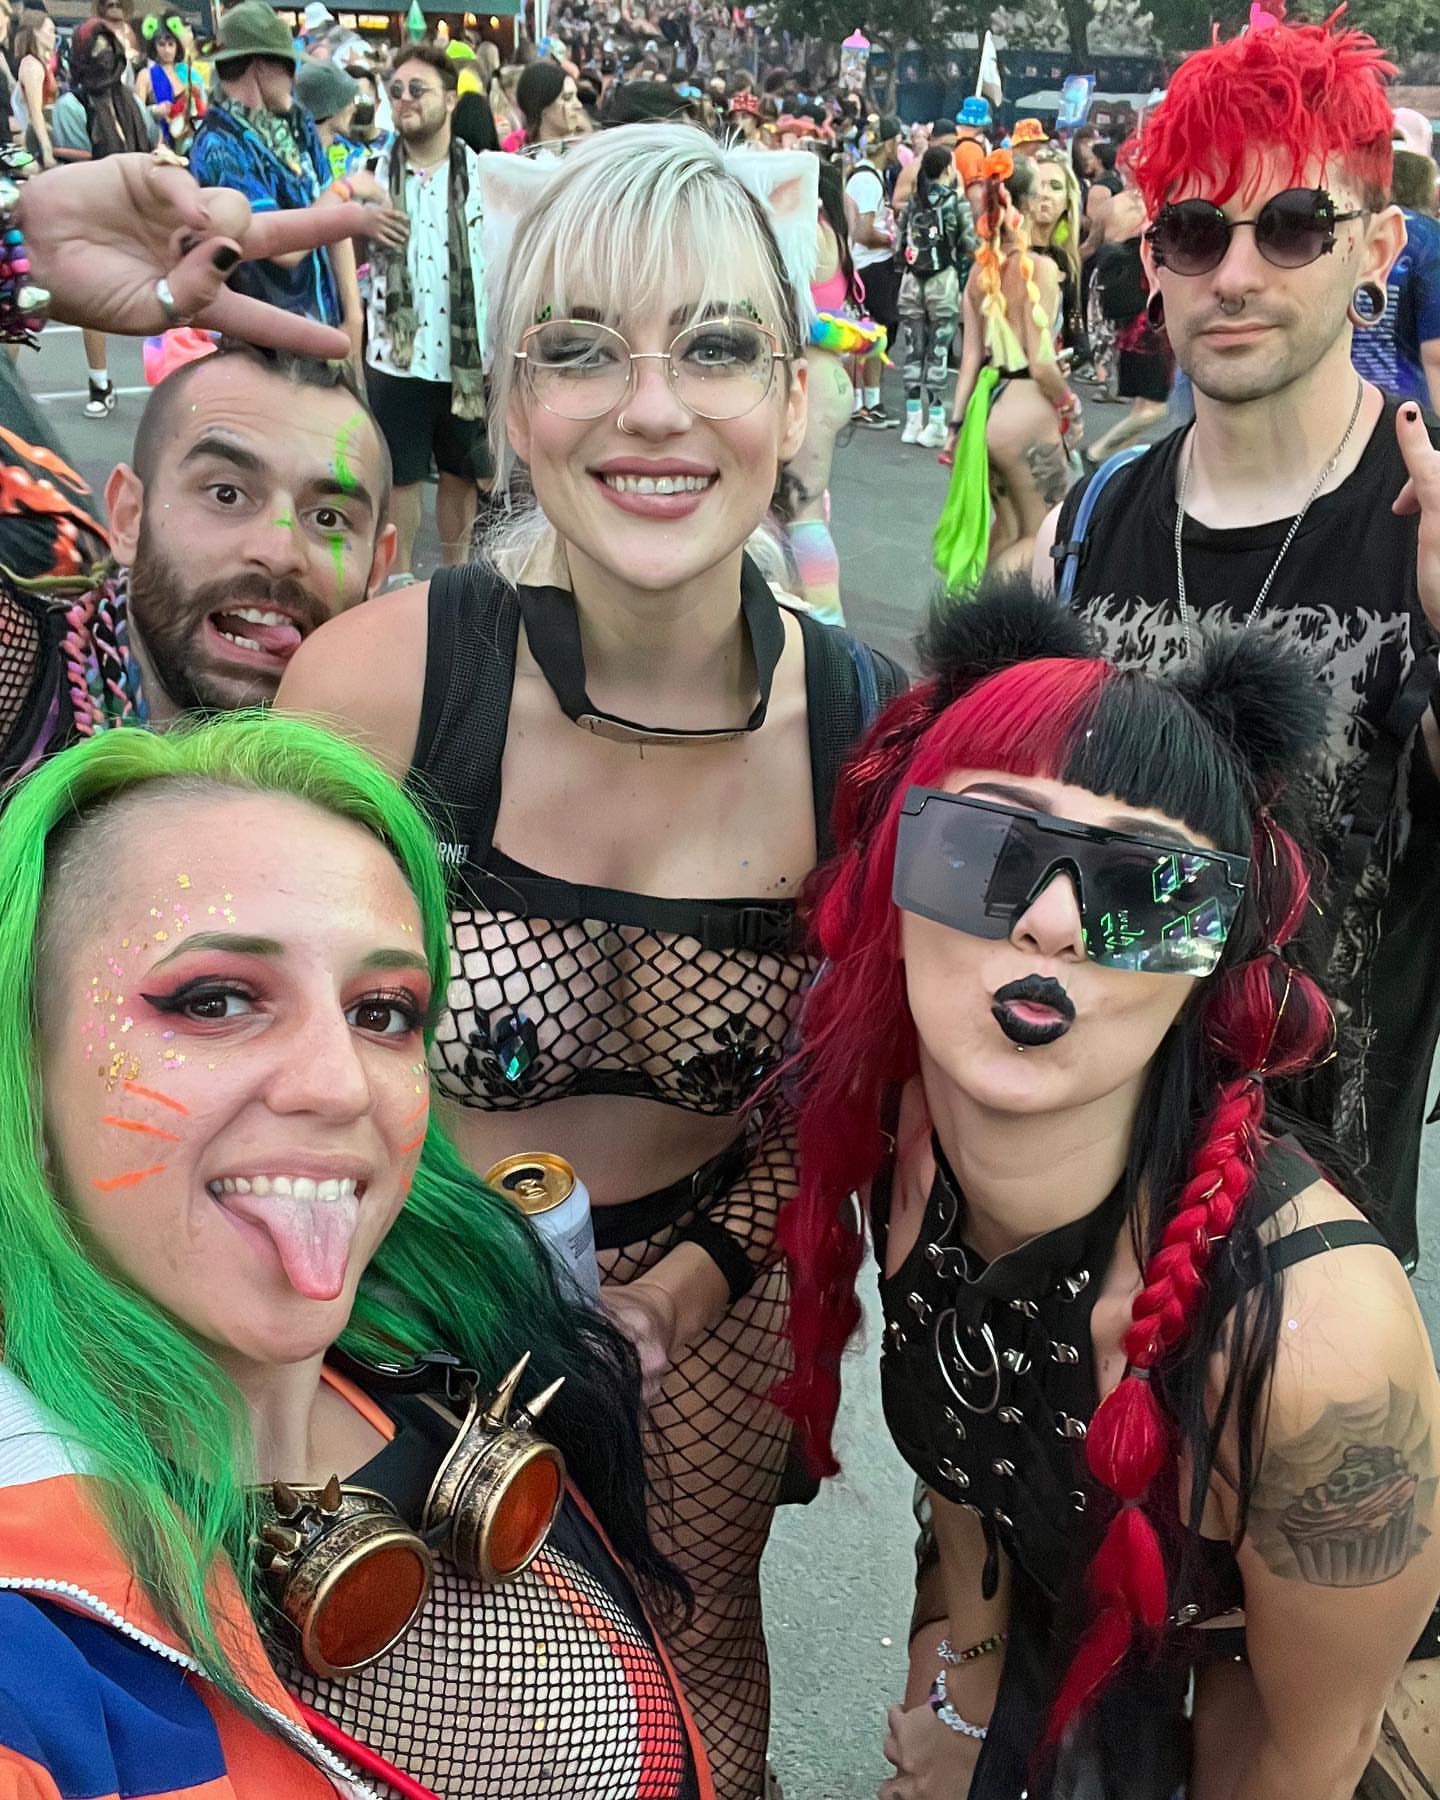 ✨KITTIES FIRST RAVE✨
DAY TWO: Naruto theme🙌🏼 it was so fun to meet a bunch of other nerds and get to party with them. The smoke had rolled in that day so it was kinda hard to breathe, but once I started hanging out with my friend Molly, everything was great😄
Amazing music, beautiful people, loving energy. Couldn’t have asked for a better time💕
What themed outfit would you want to wear??
•
•
•
#rave #festival #firstrave #basscanyon #basscanyon2023 #thegorge #thegorgeamphitheater #naruto #narutofans #saturdaysareforthegirls